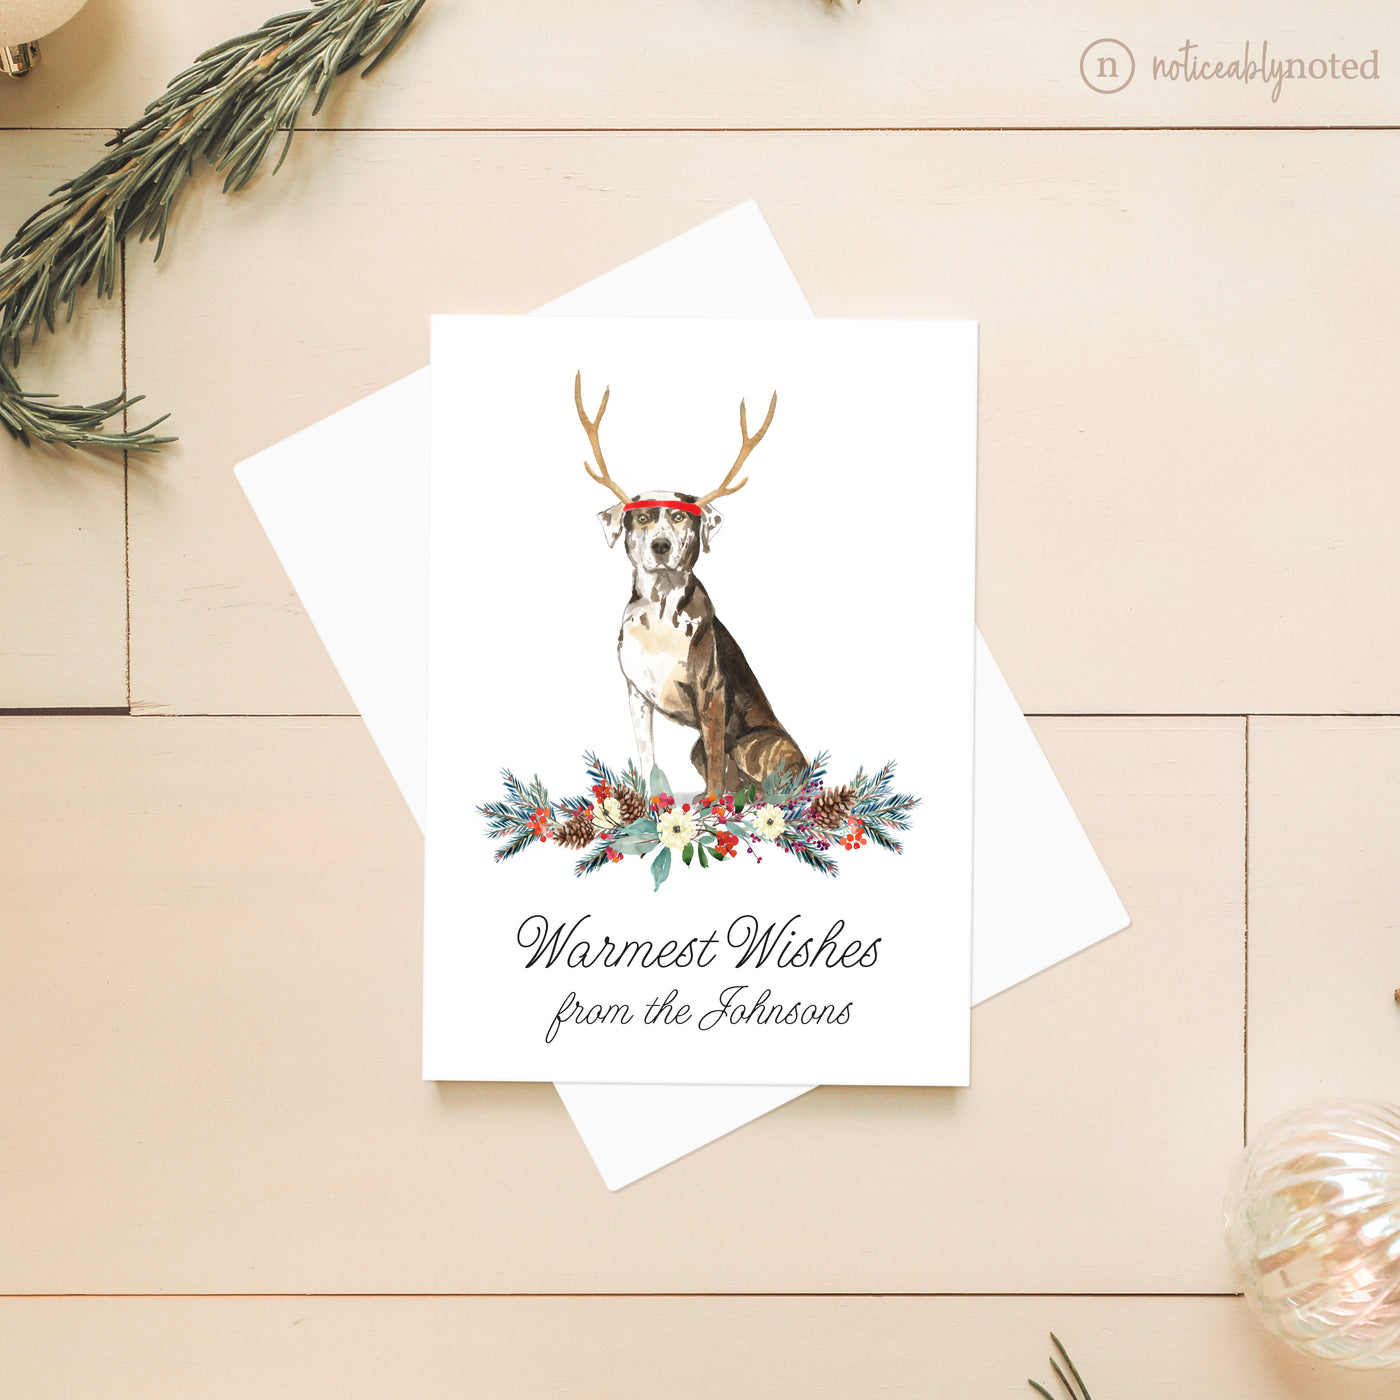 Catahoula Leopard Dog Christmas Cards | Noticeably Noted